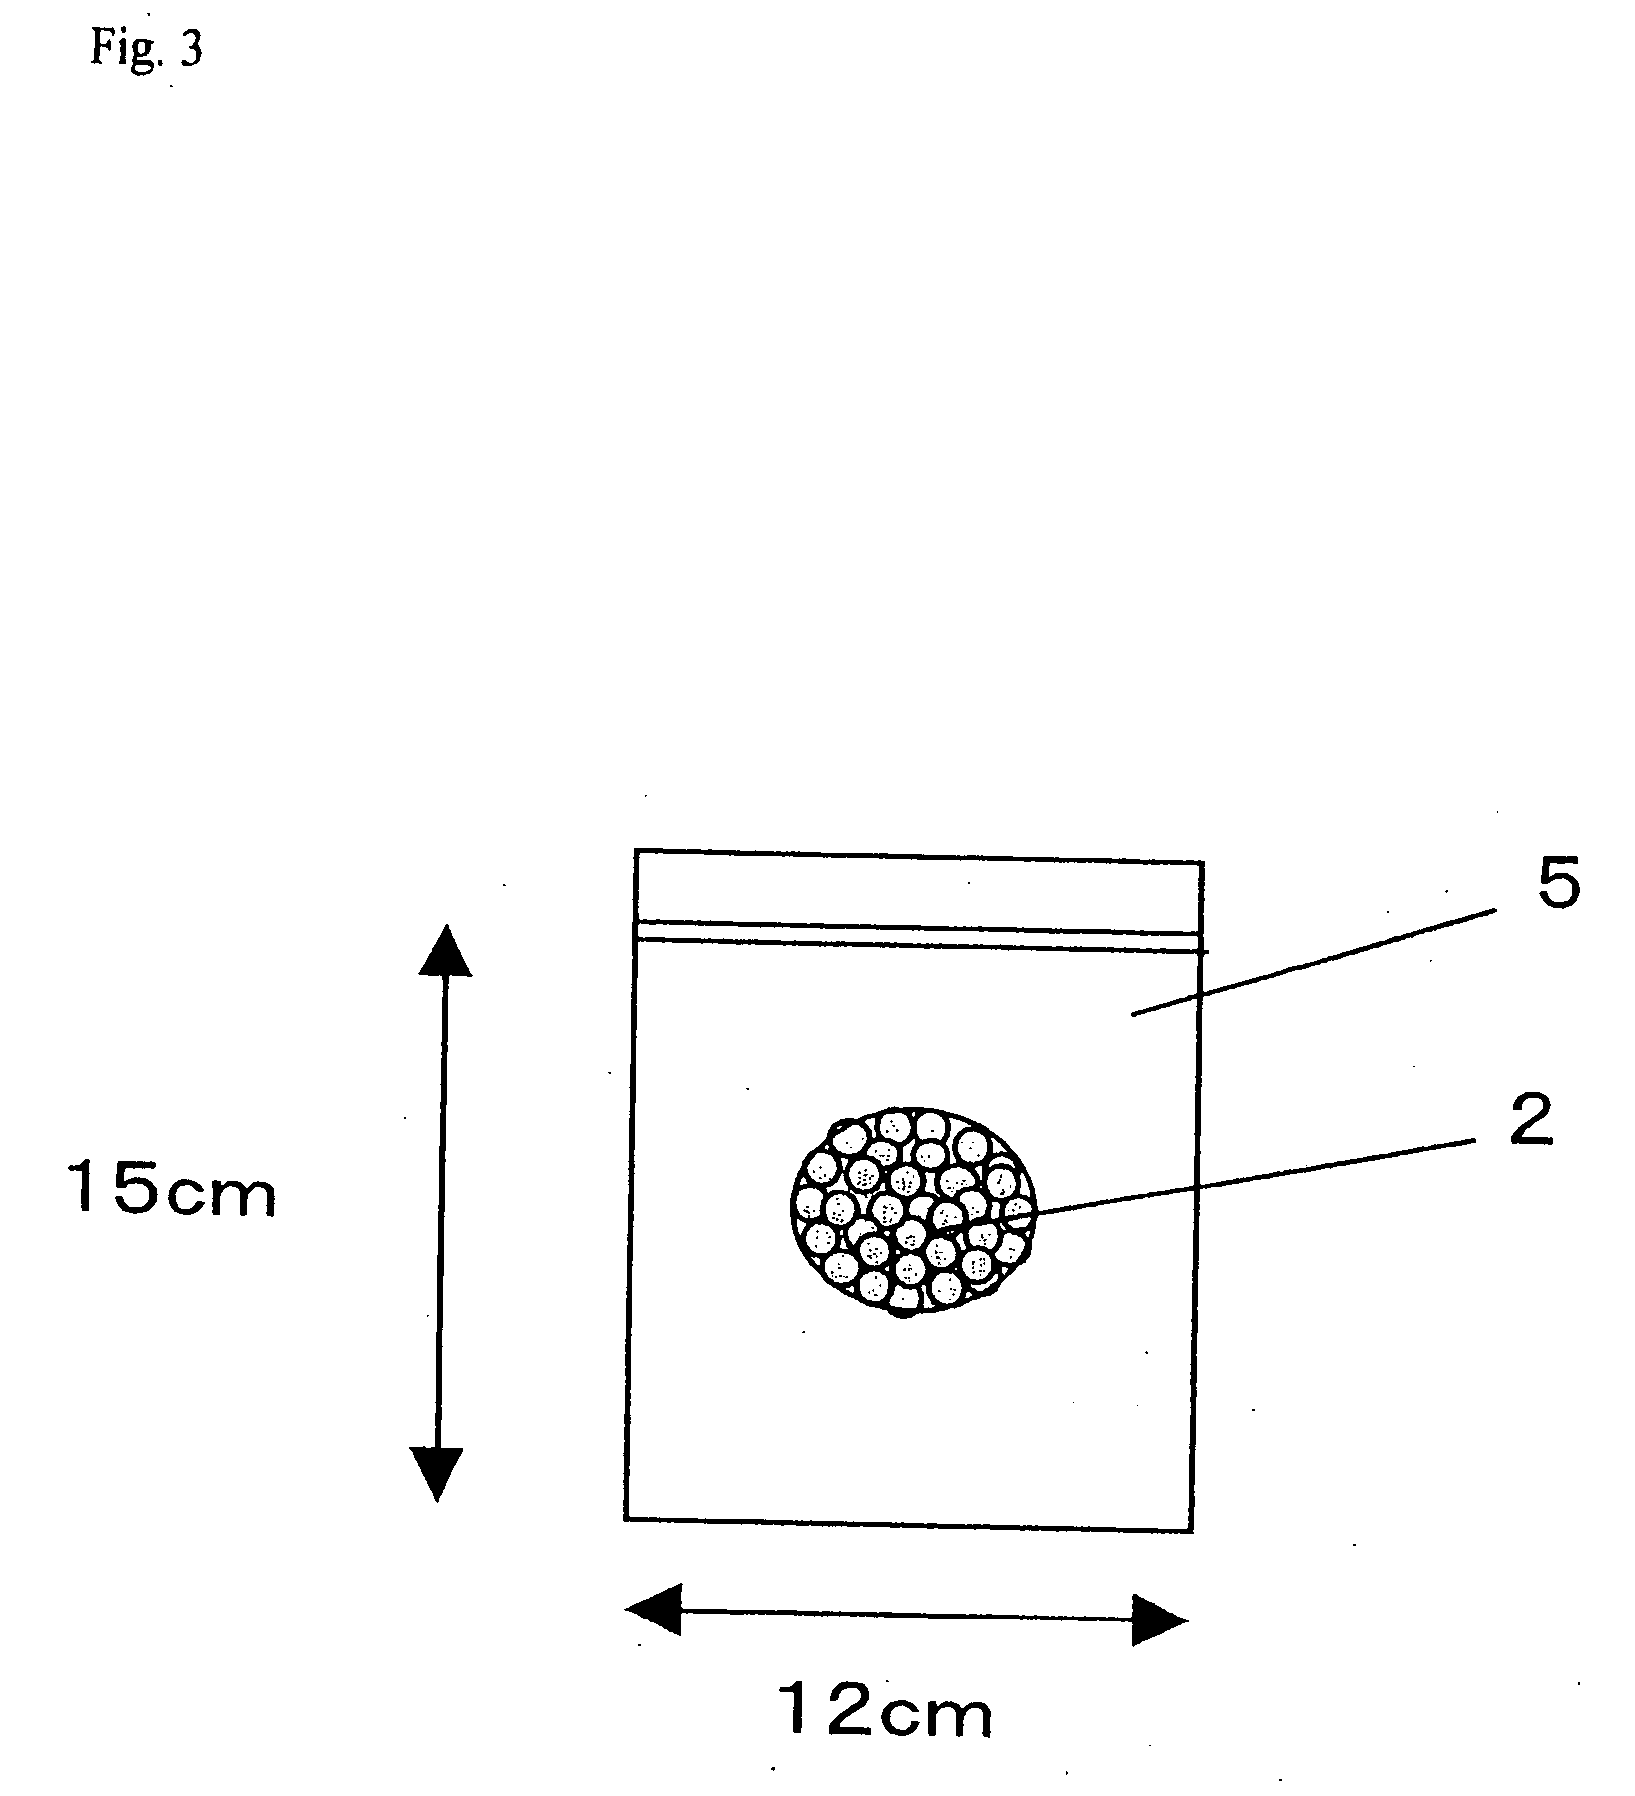 Water-absorbing agent and production process therfor, and water-absorbent structure